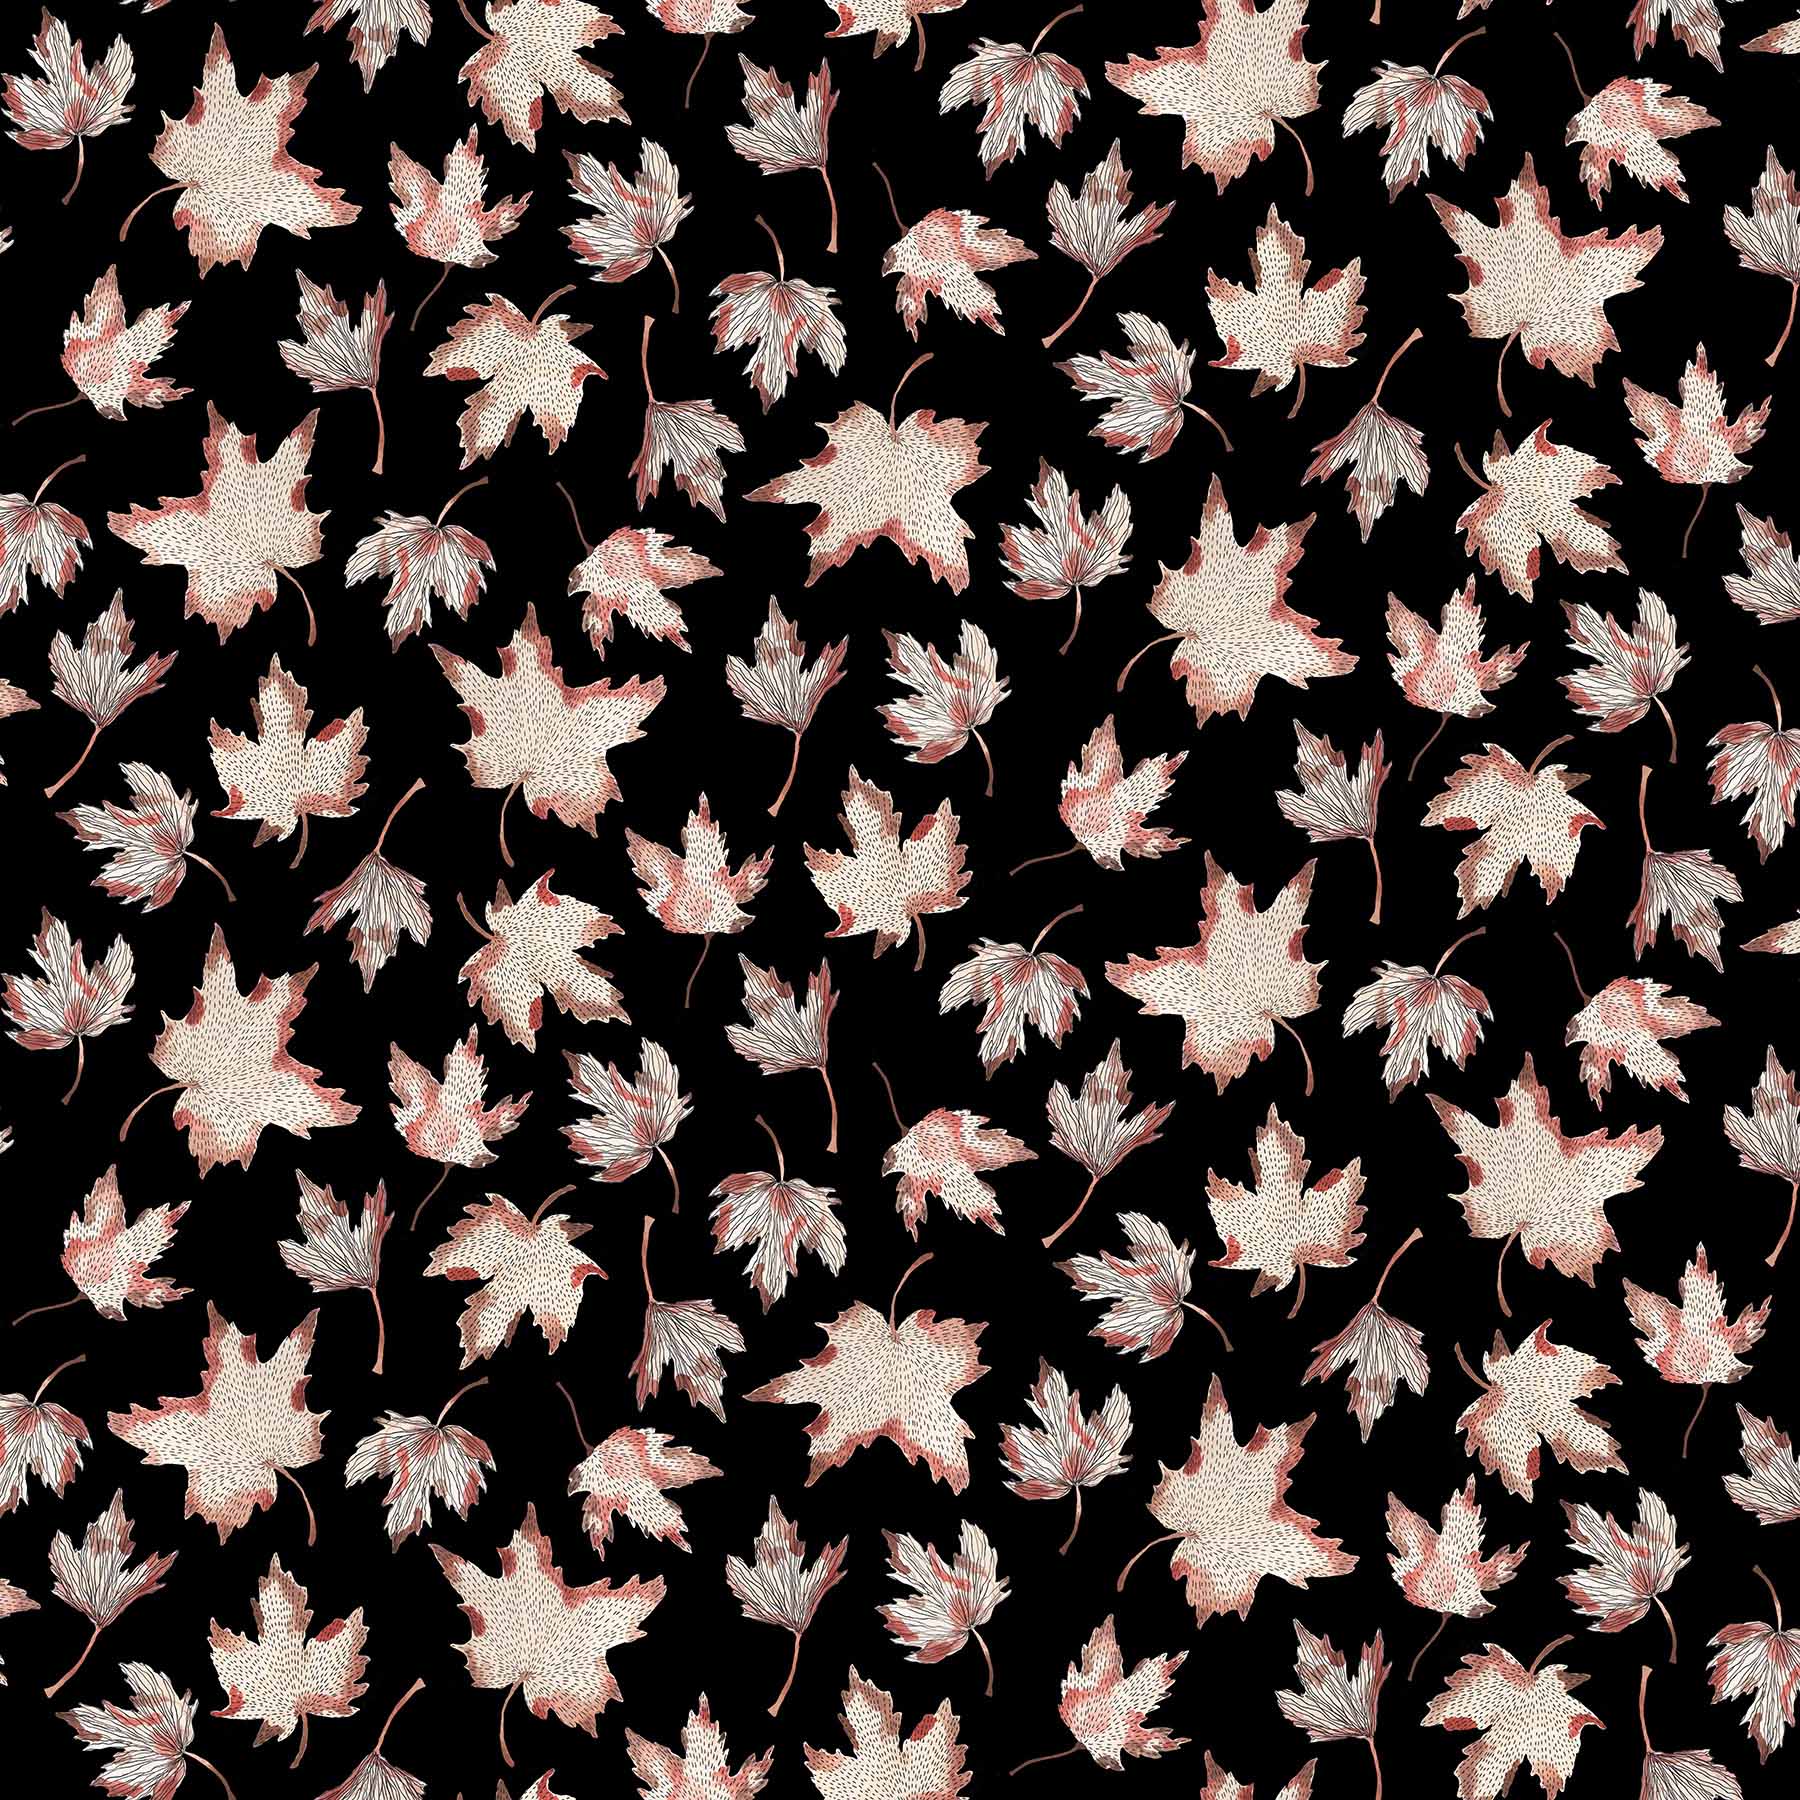 After the Rain Quilt Fabric - Maple Leaves on Black - 90162 99